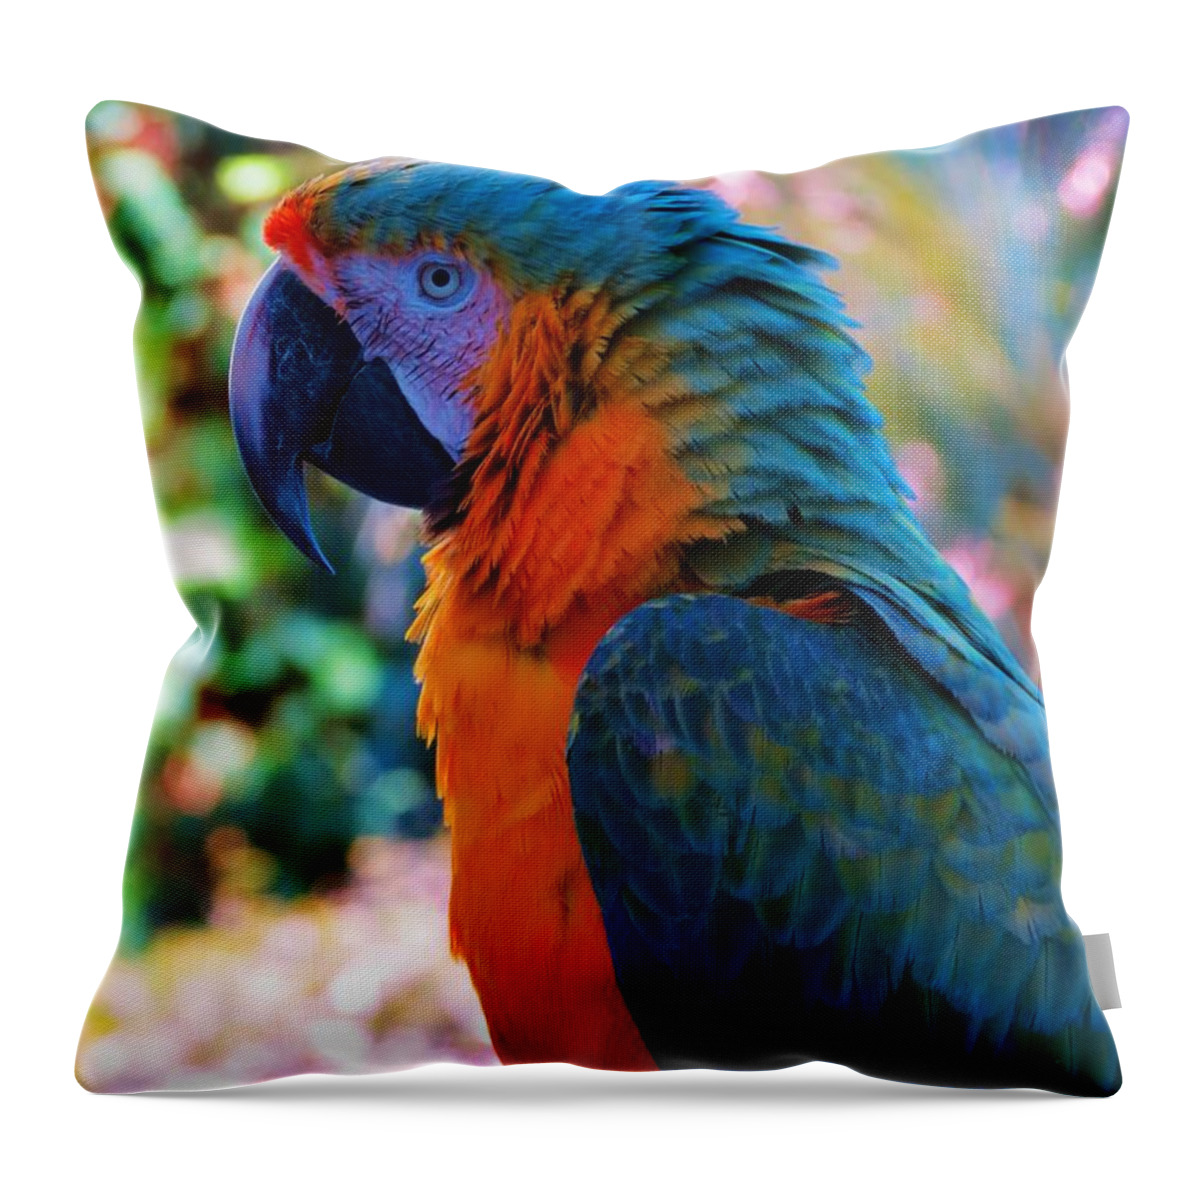 Birds Throw Pillow featuring the photograph Parrot 4 by Vijay Sharon Govender